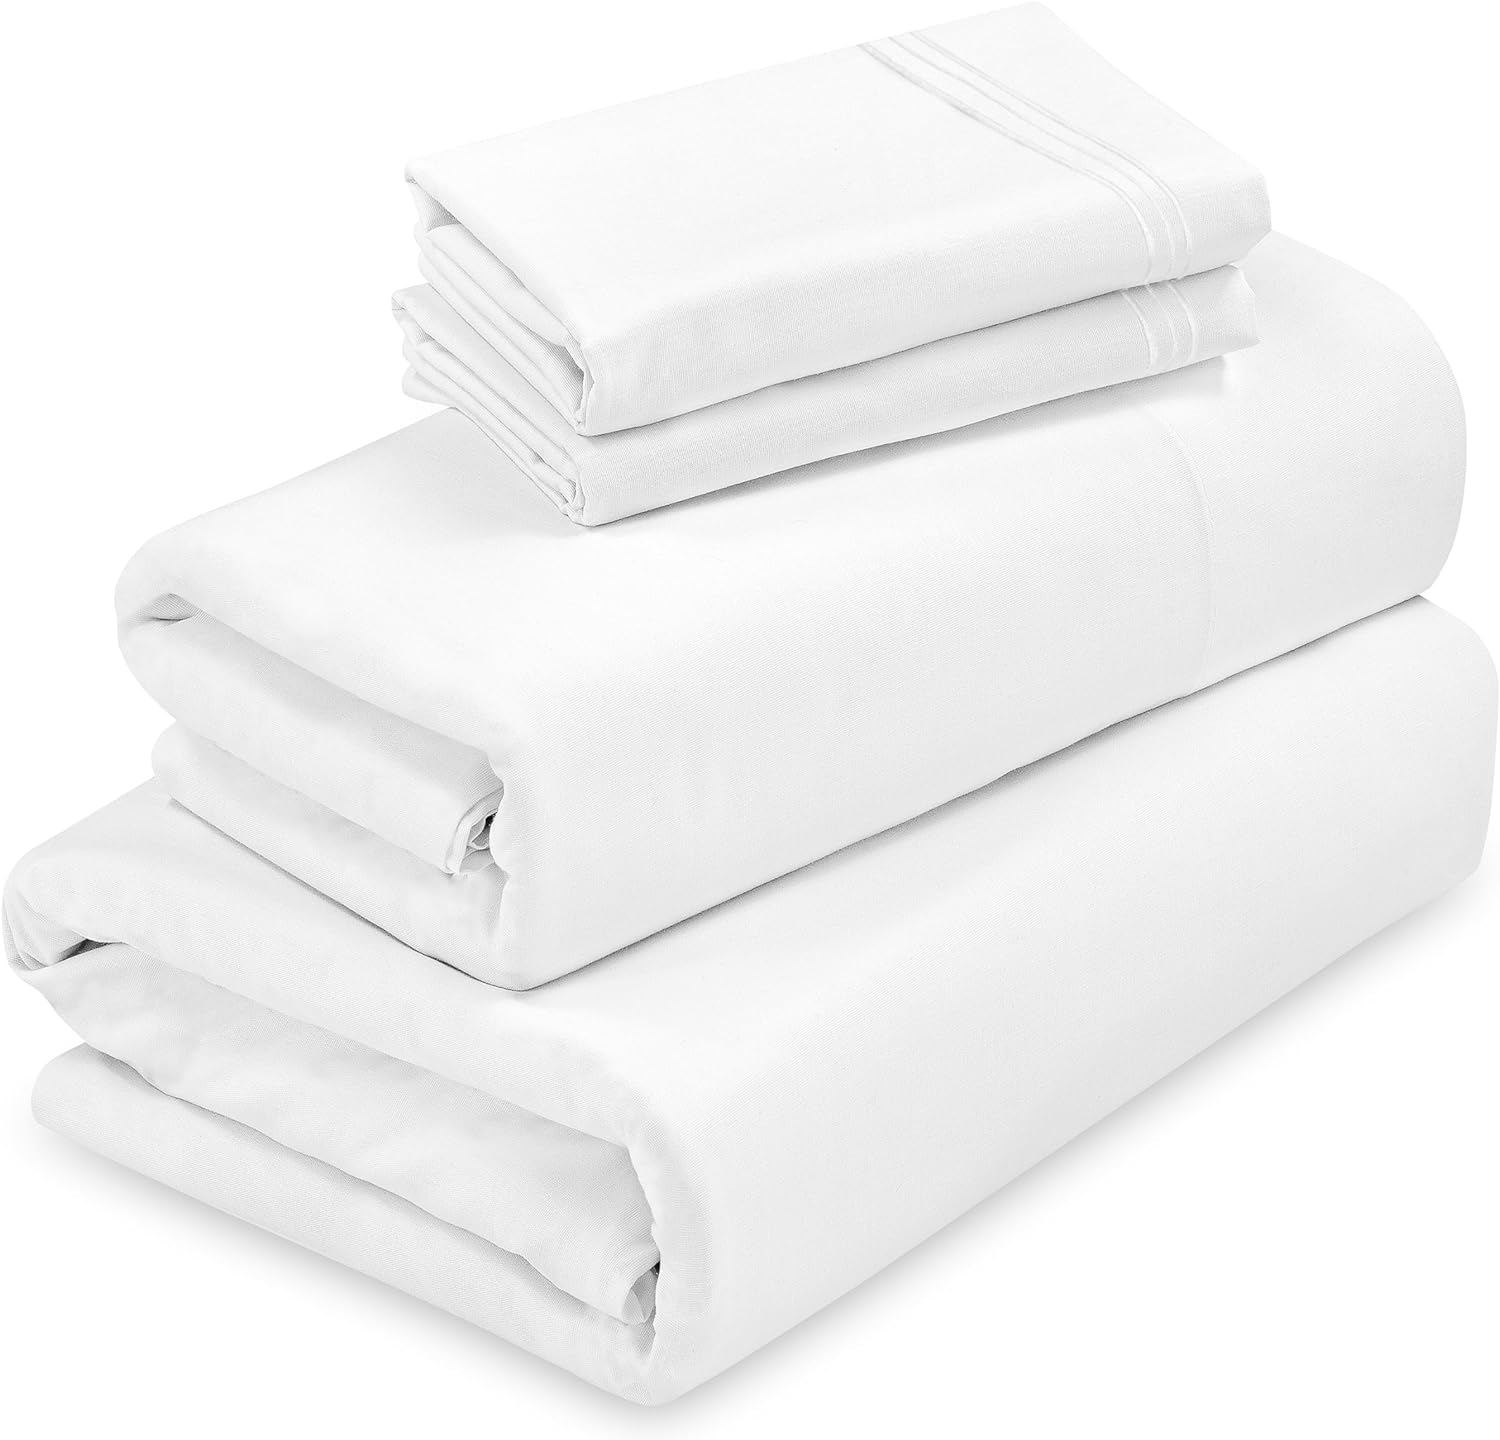 ROYALE LINENS - 4 Piece California King Bed Sheet - Brushed Microfiber 1800 Bedding - 1 Fitted Sheet, 1 Flat Sheet, 2 Pillow Case - Wrinkle & Fade Resistant Cal King Size Sheet Set (King Cal, White)